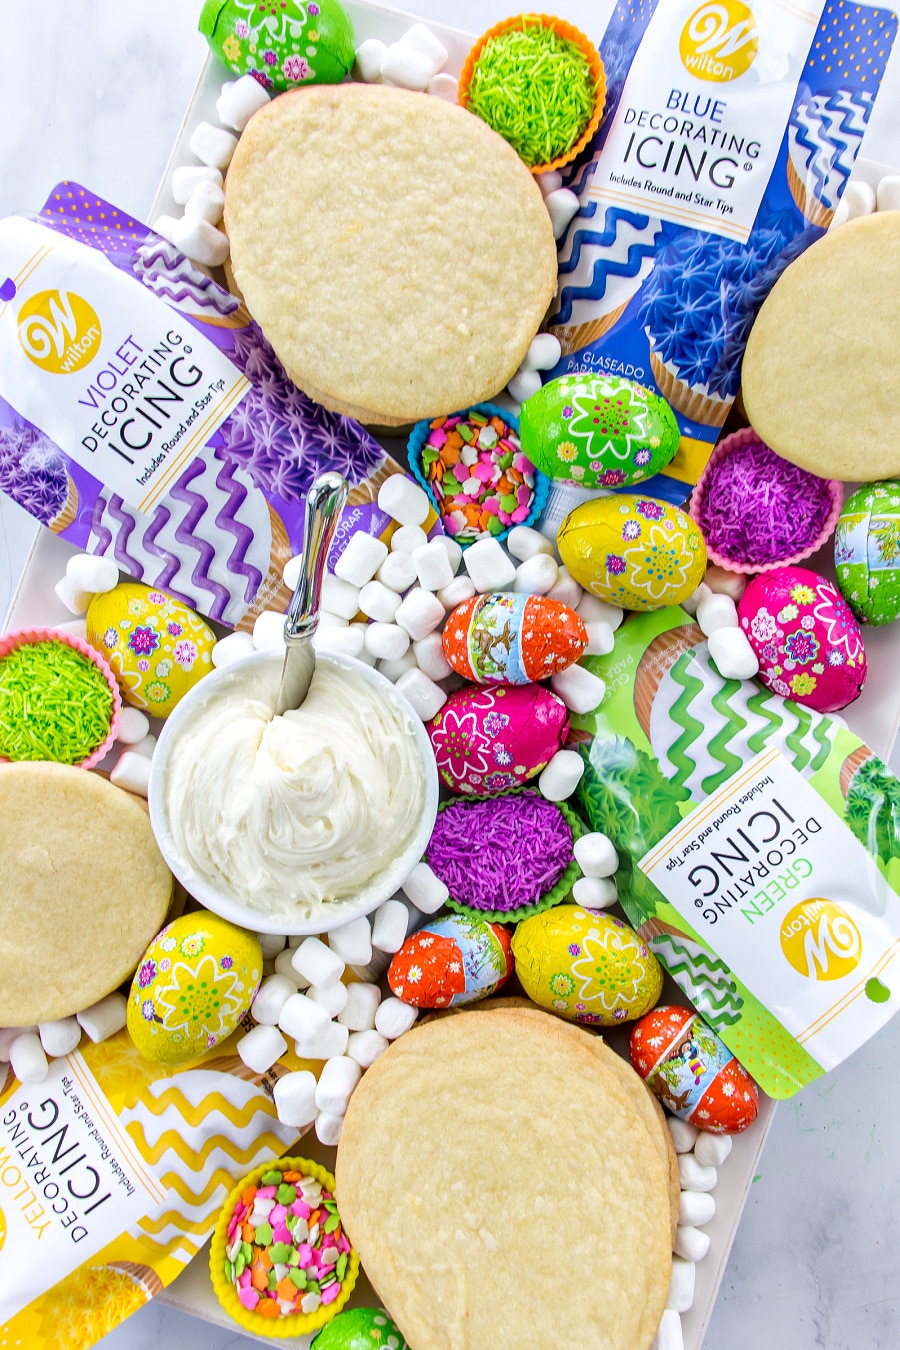 Set up an Easter grazing board for kids that's filled with cookies and toppings for cookie decorating.